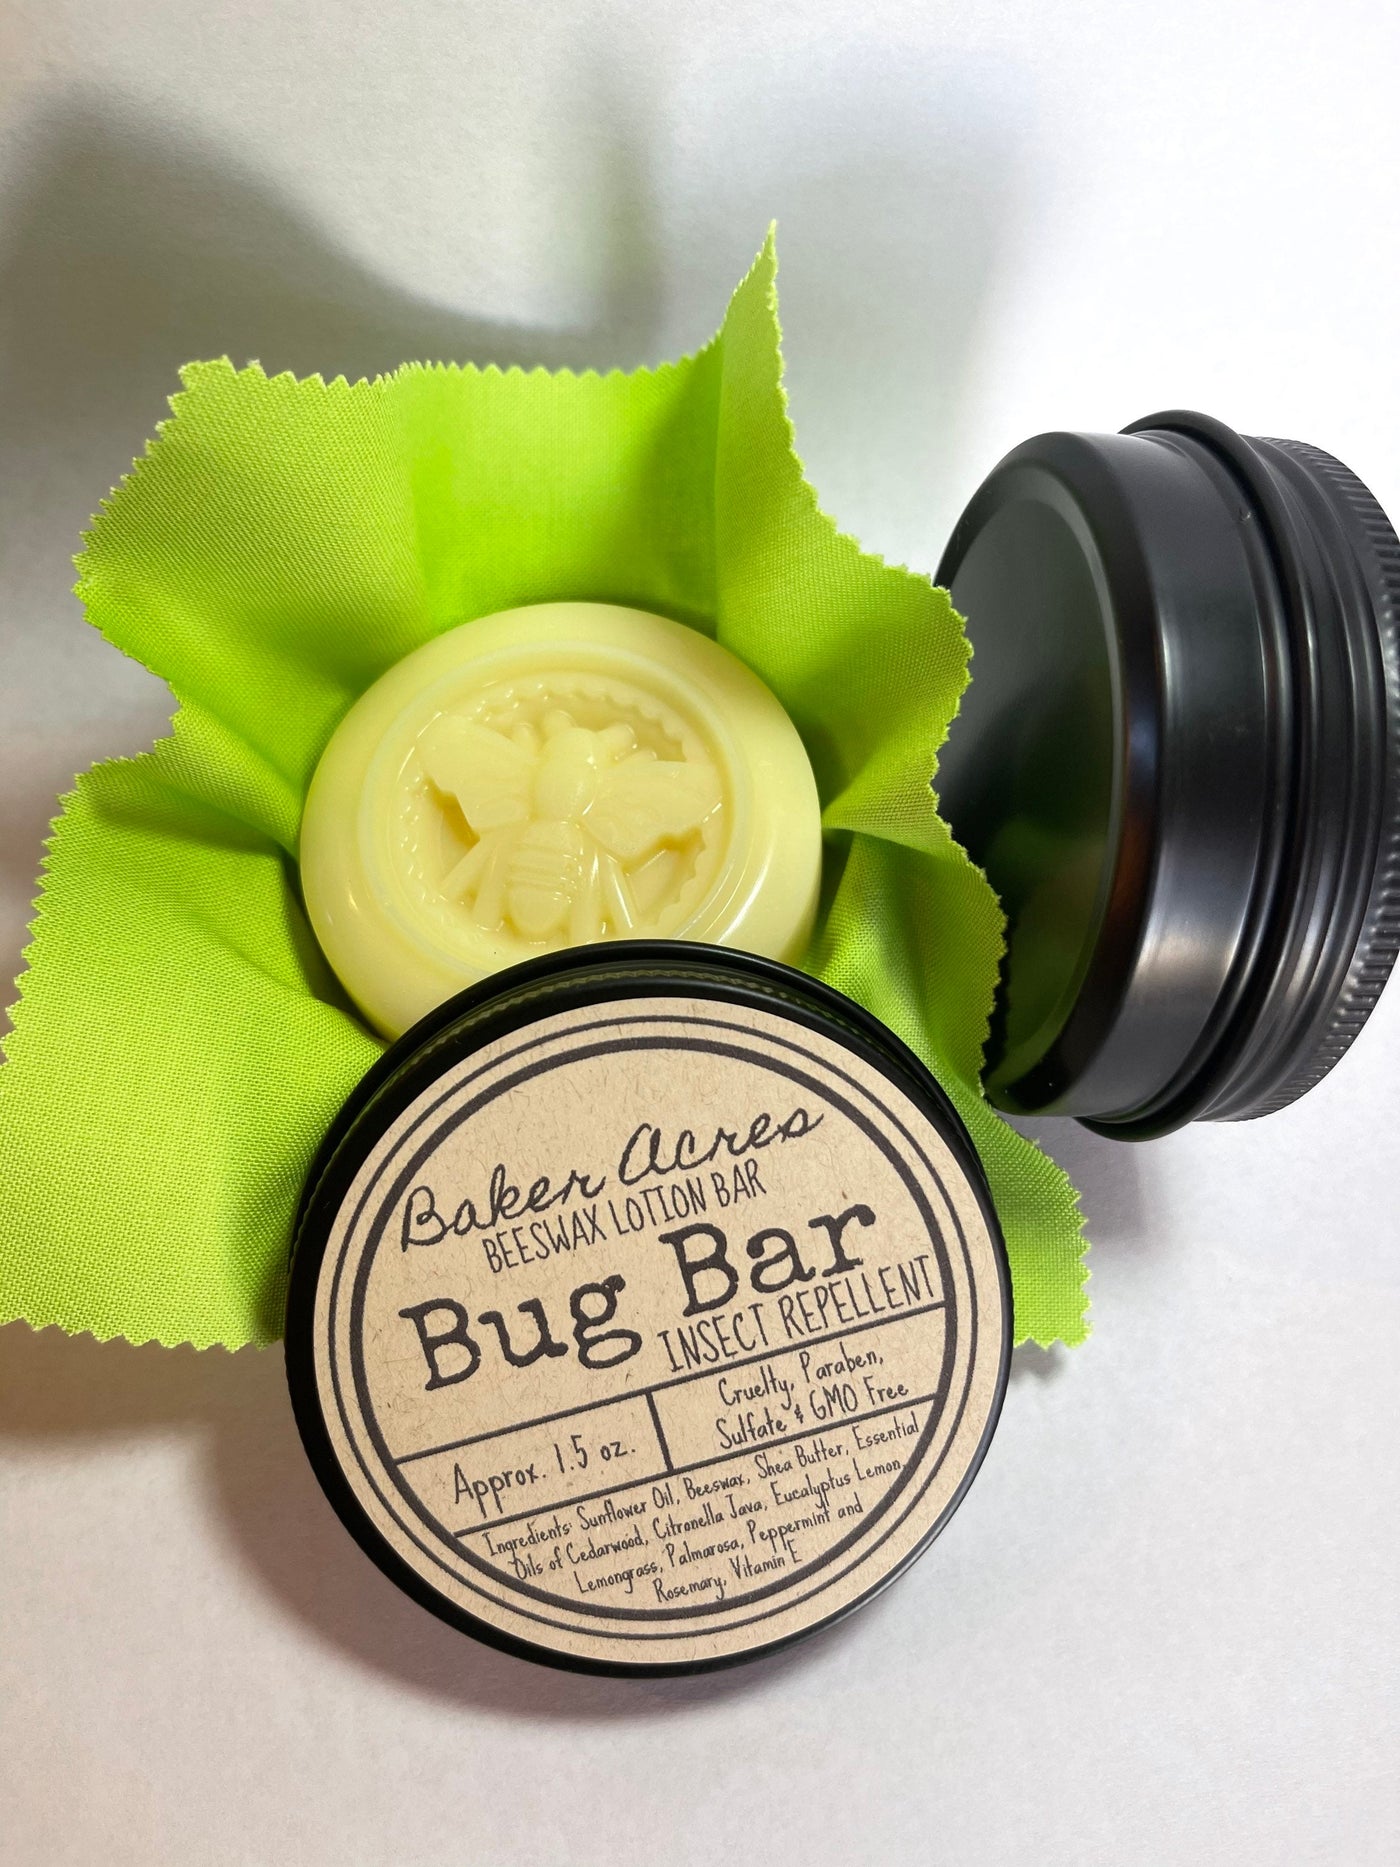 Beeswax Lotion Bar | Insect Repellent Lotion Bar | Natural Bug Repellent (Kids Safe) | Mosquito Repellent | Outdoor Camping Gift | Deet Free